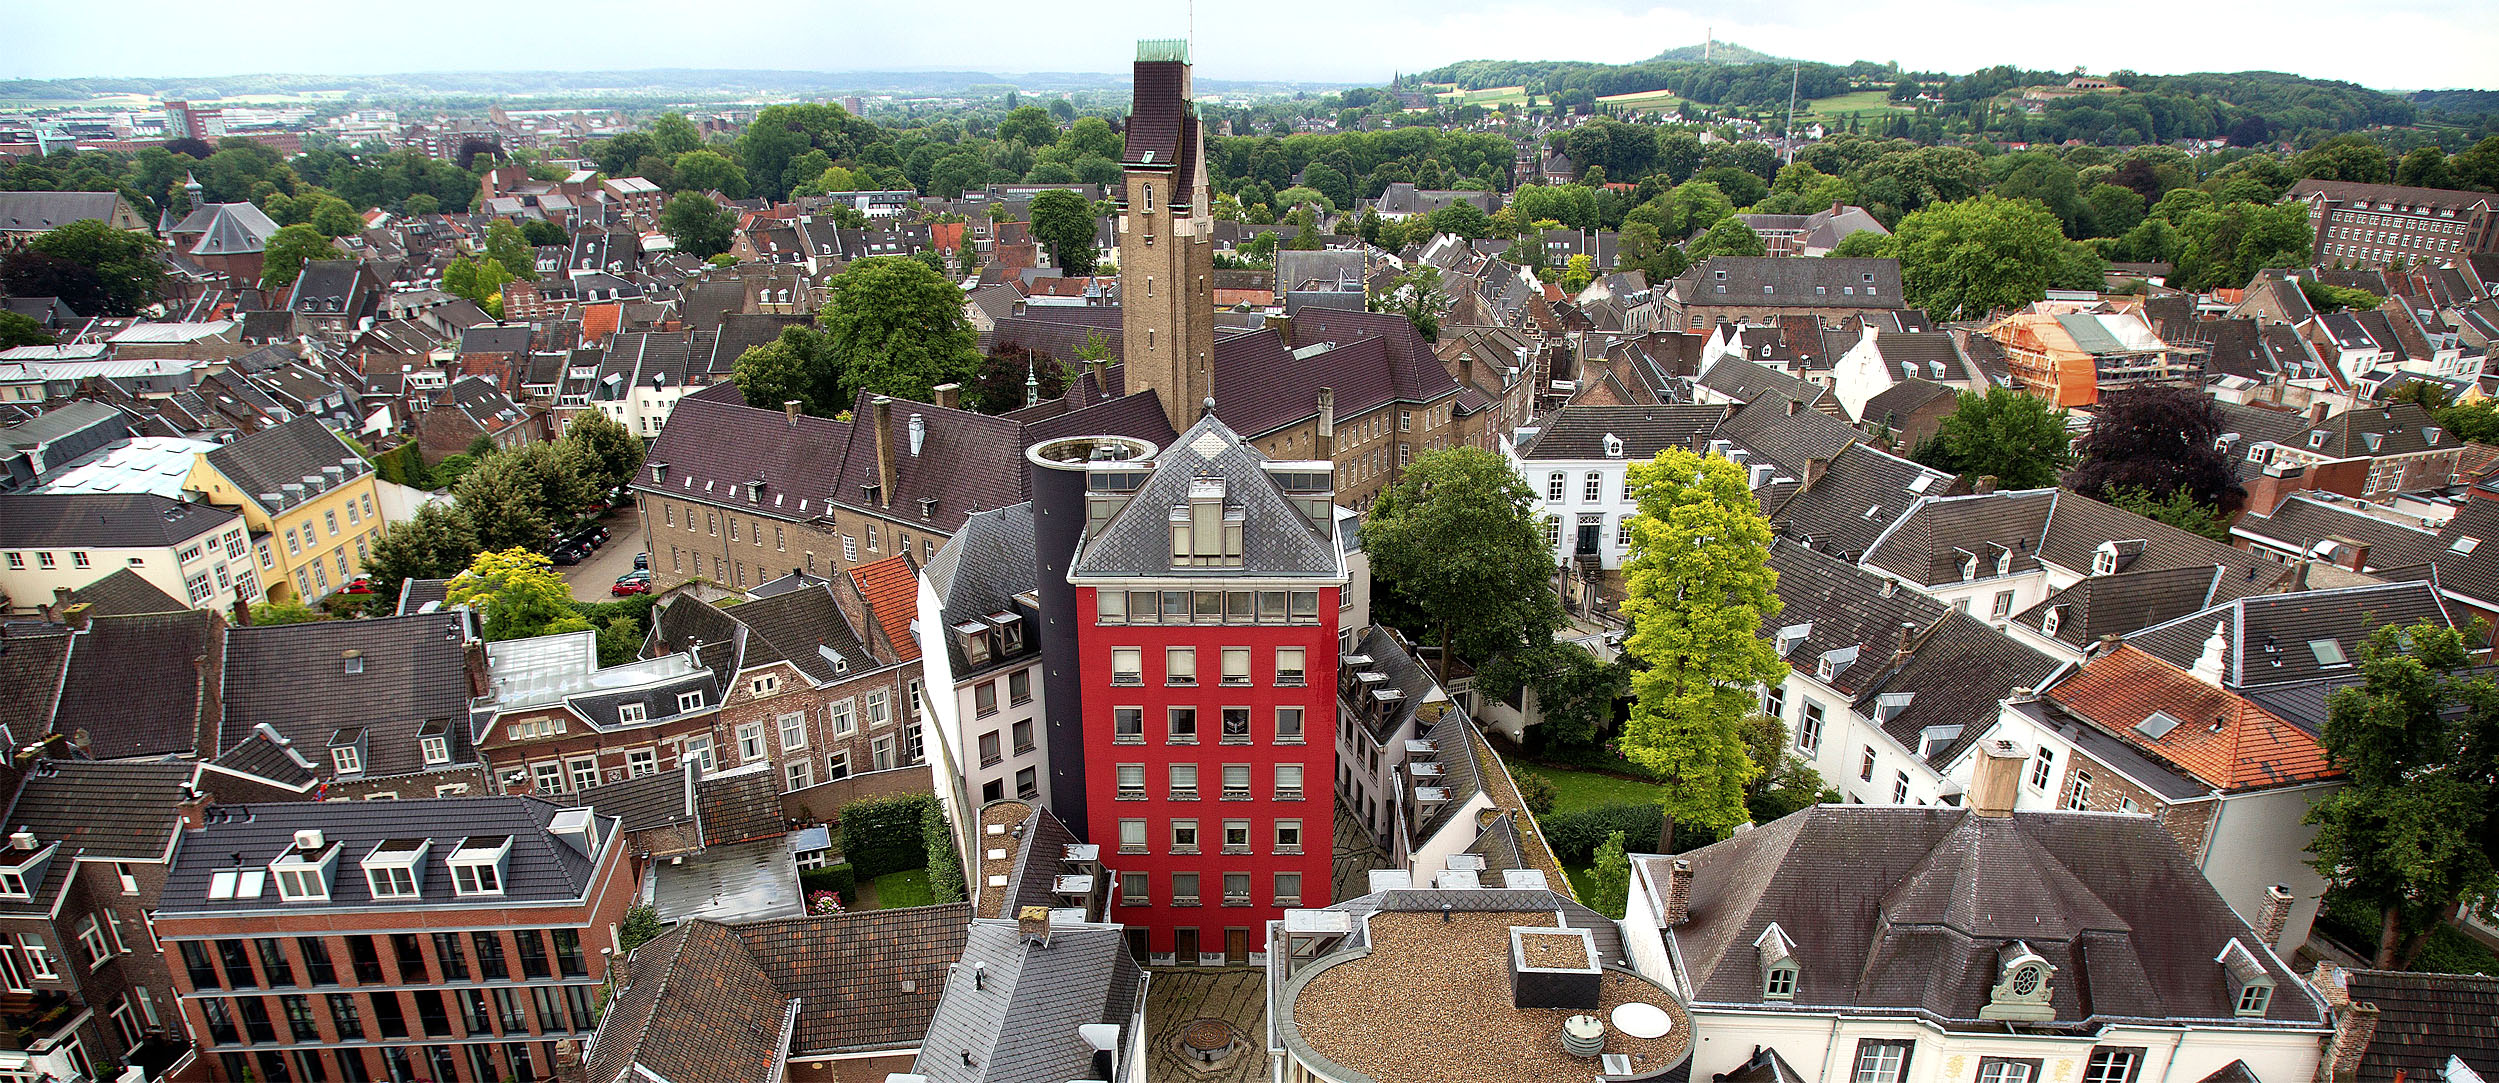 Panoramic view of Maastricht city centre